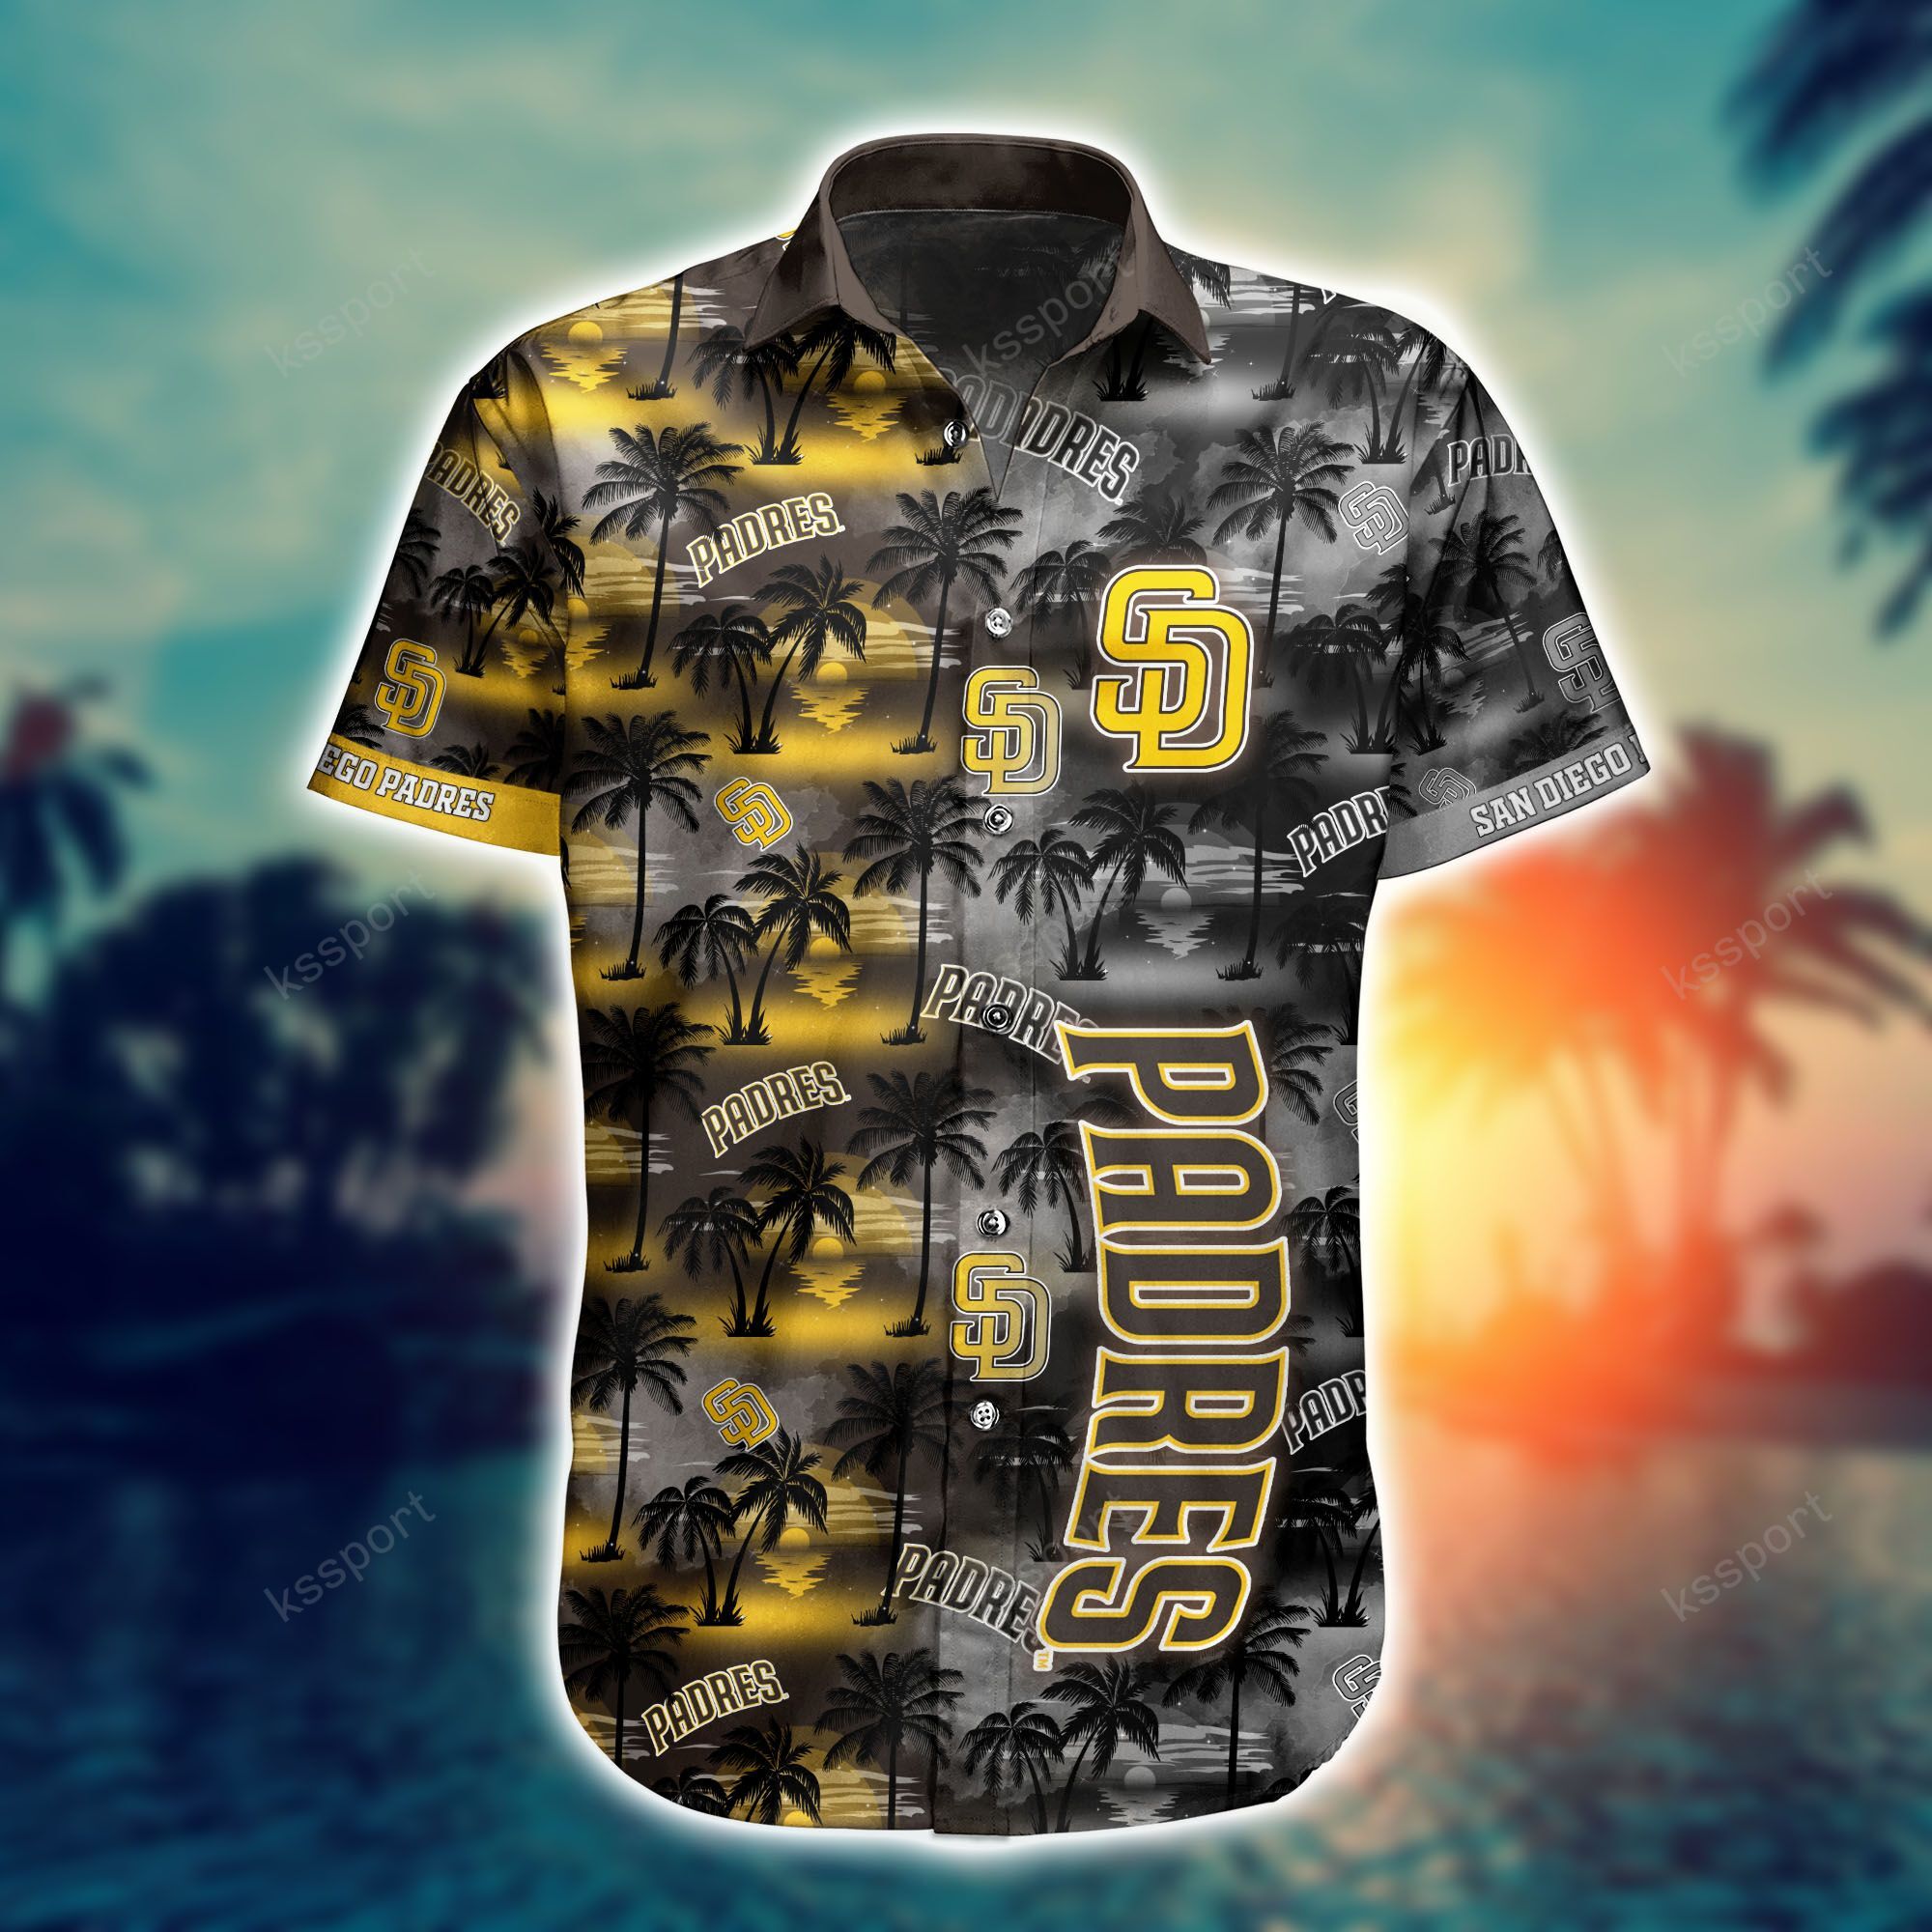 Top cool Hawaiian shirt 2022 - Make sure you get yours today before they run out! 237